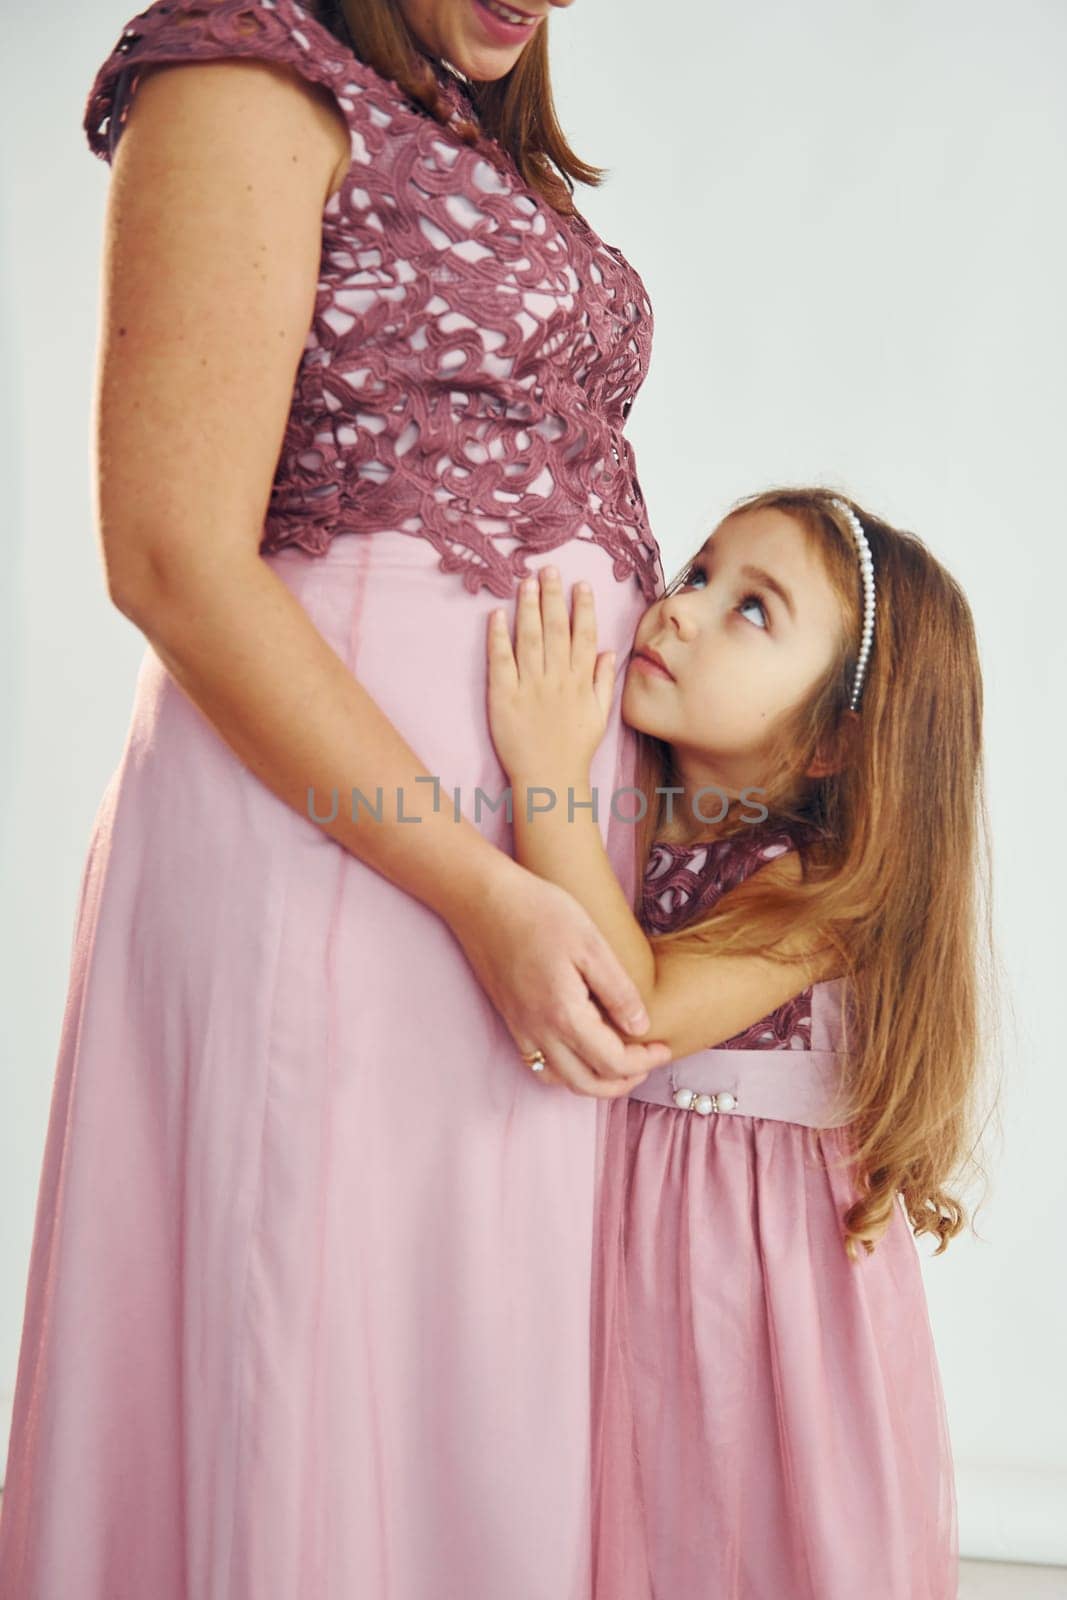 Conception of anticipation. Pregnant mother. Woman in dress standing with her daughter in the studio with white background.